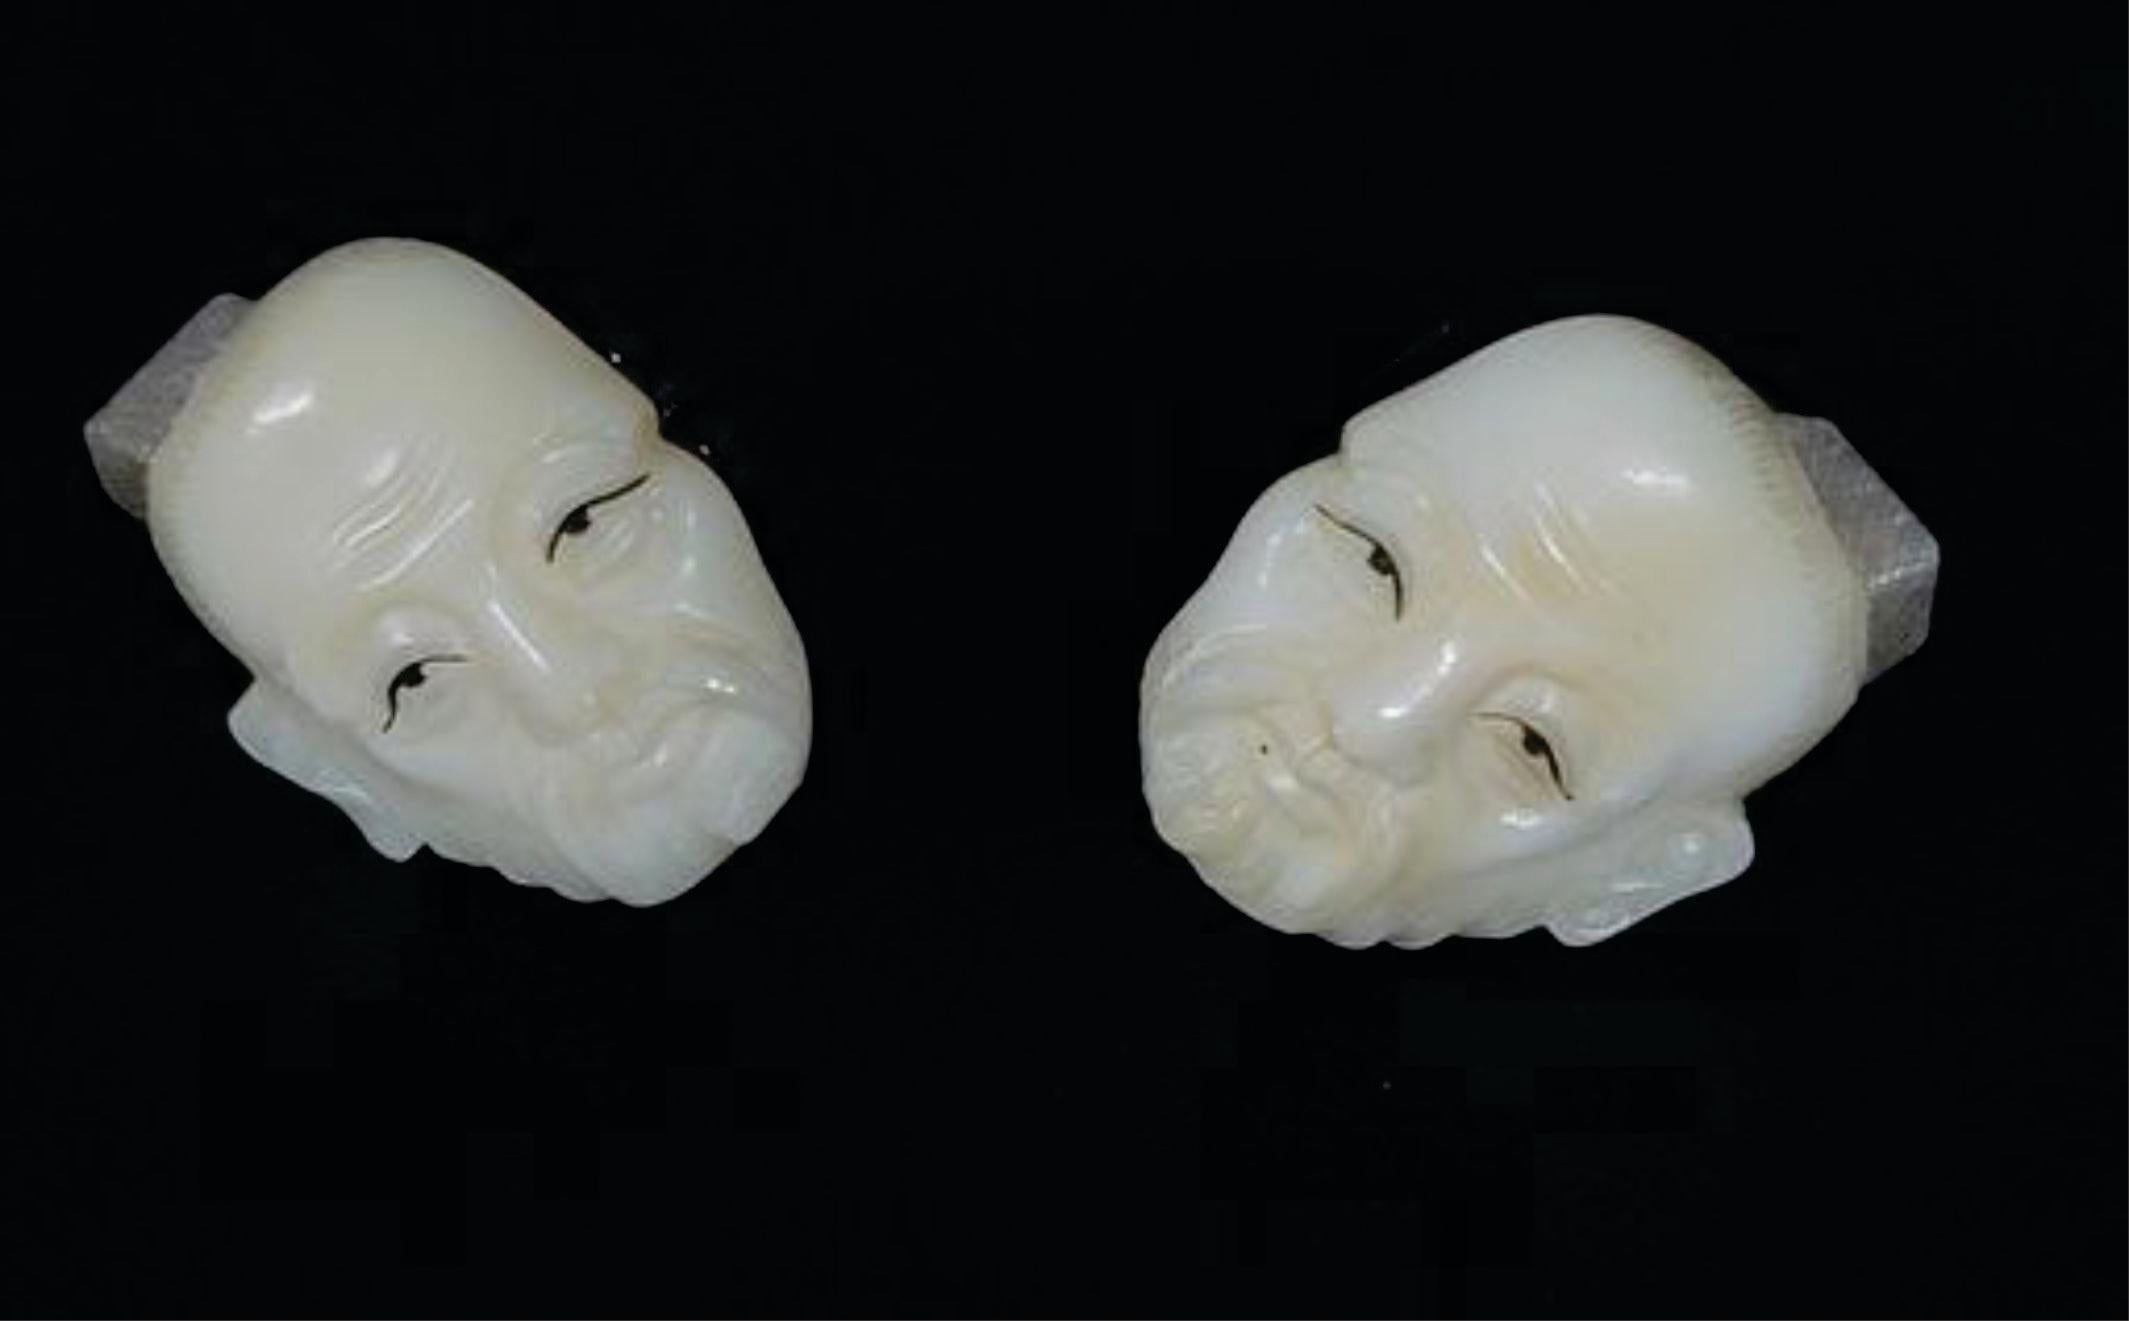 Japanese a pair of finely carved cuff links with opposing faces
Dimension:  Size: 3cm 
Condition: Excellent Condition, no damage.

